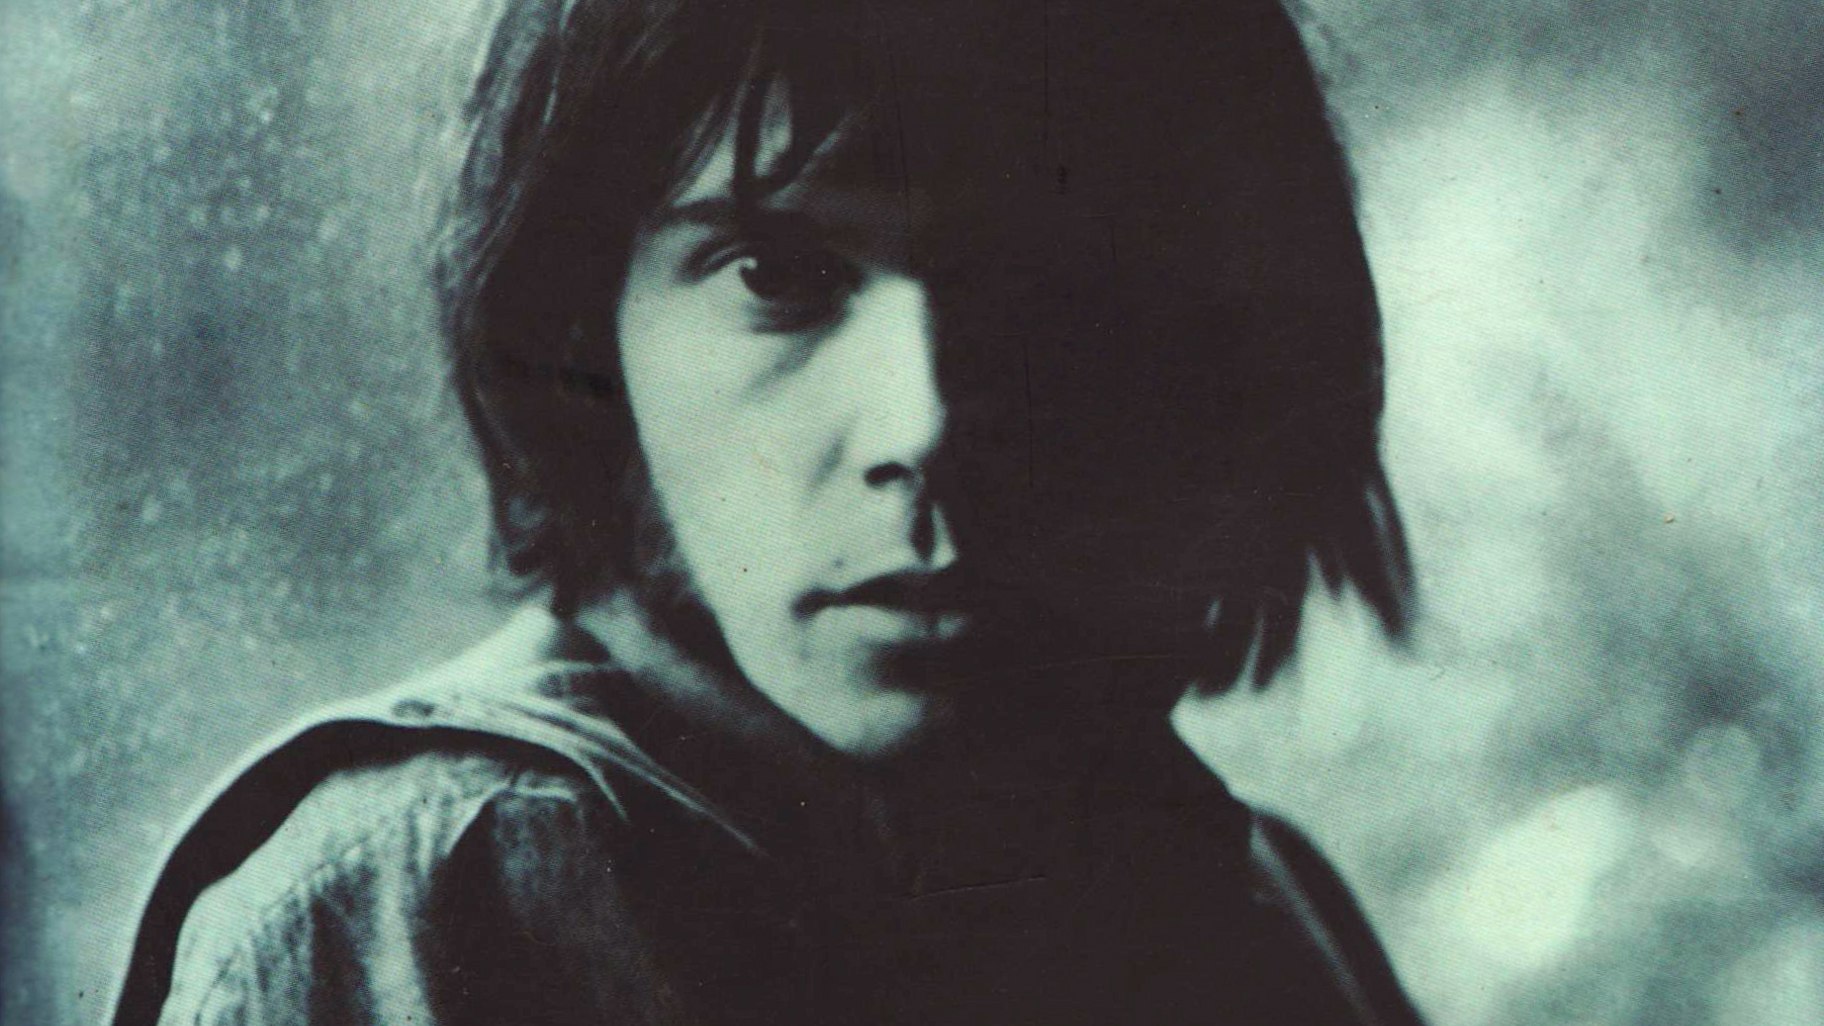 Neil Young biography, "Shakey," by Jimmy McDonough -